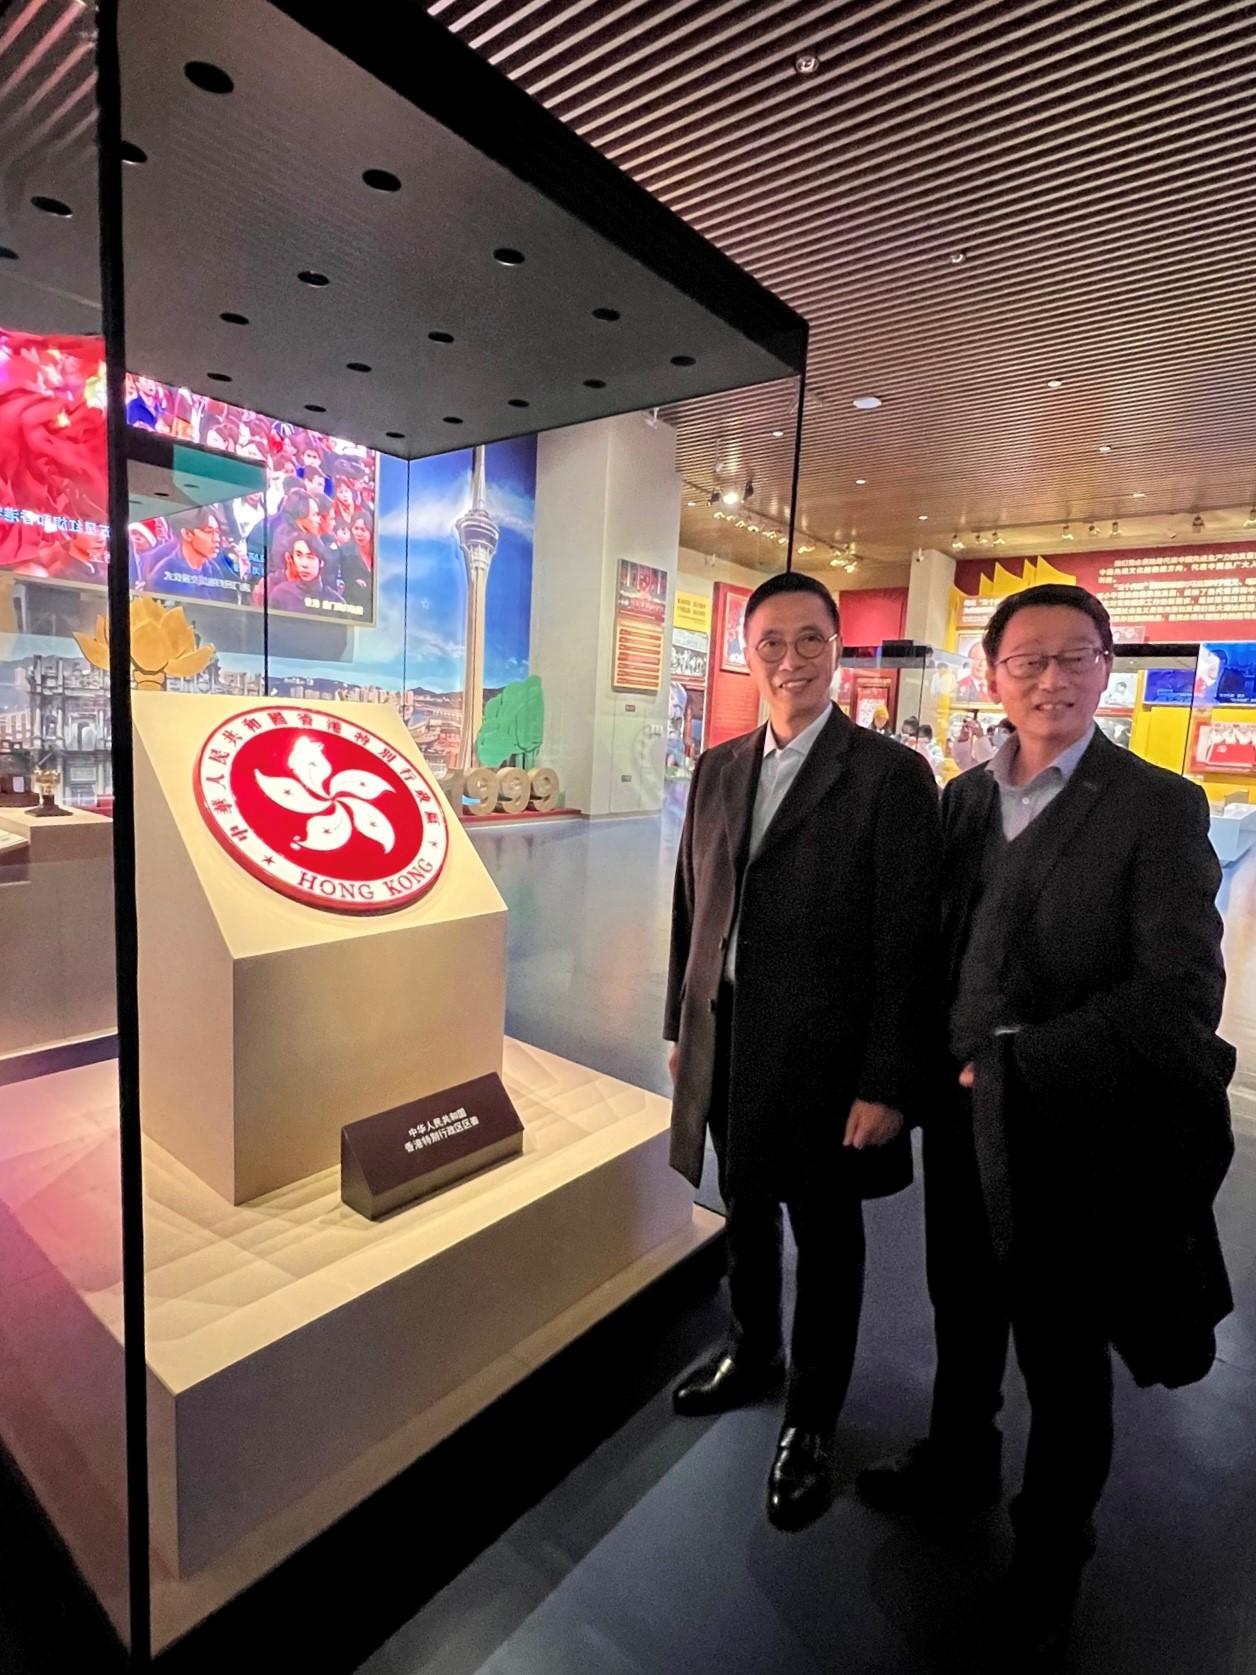 Accompanied by the Director of Leisure and Cultural Services, Mr Vincent Liu (right), the Secretary for Culture, Sports and Tourism, Mr Kevin Yeung (left), visited the Museum of the Communist Party of China in Beijing yesterday (November 16).